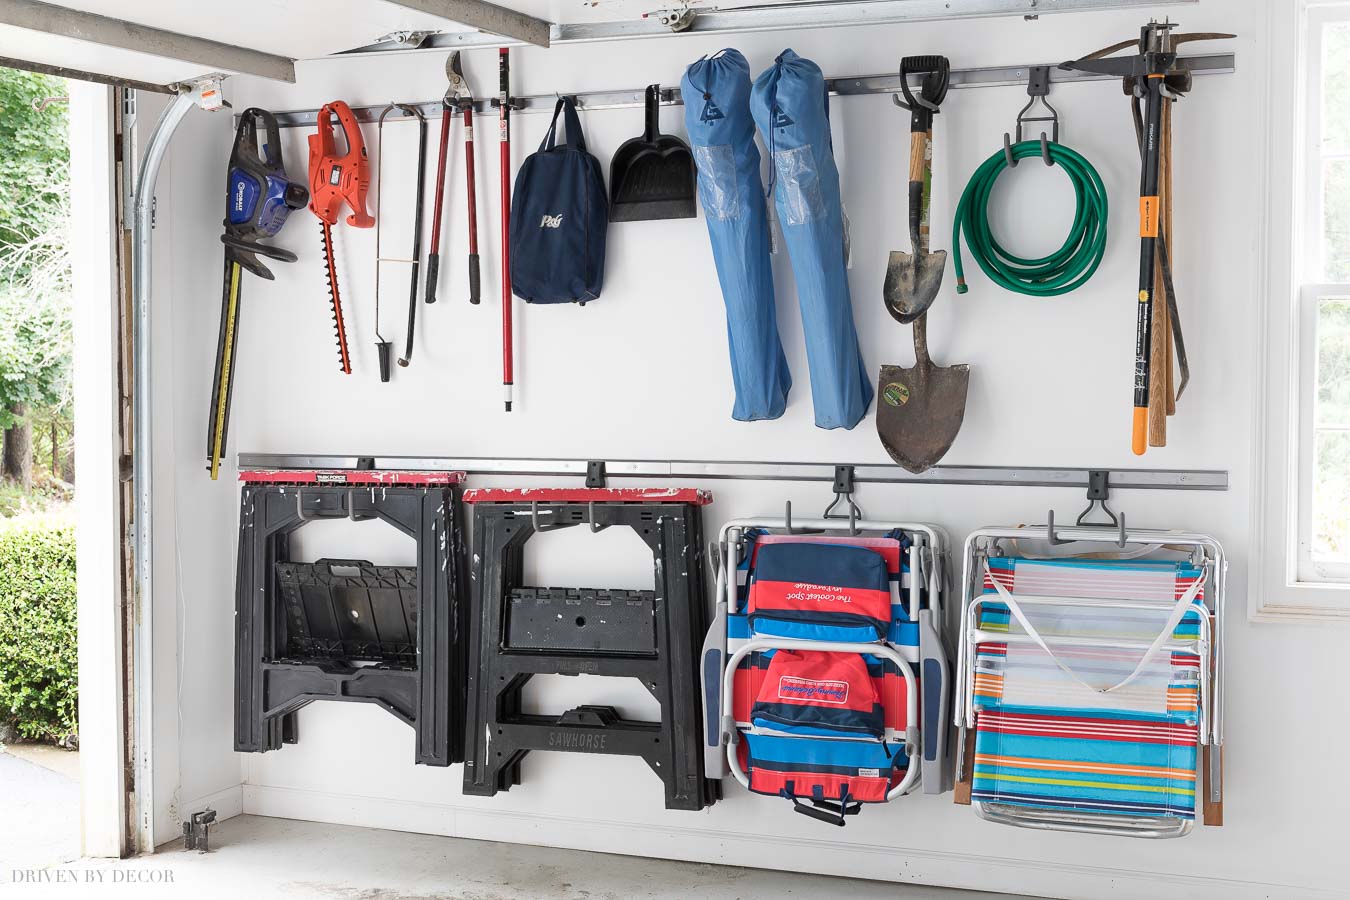 Tools and chairs hung on track system in organized garage